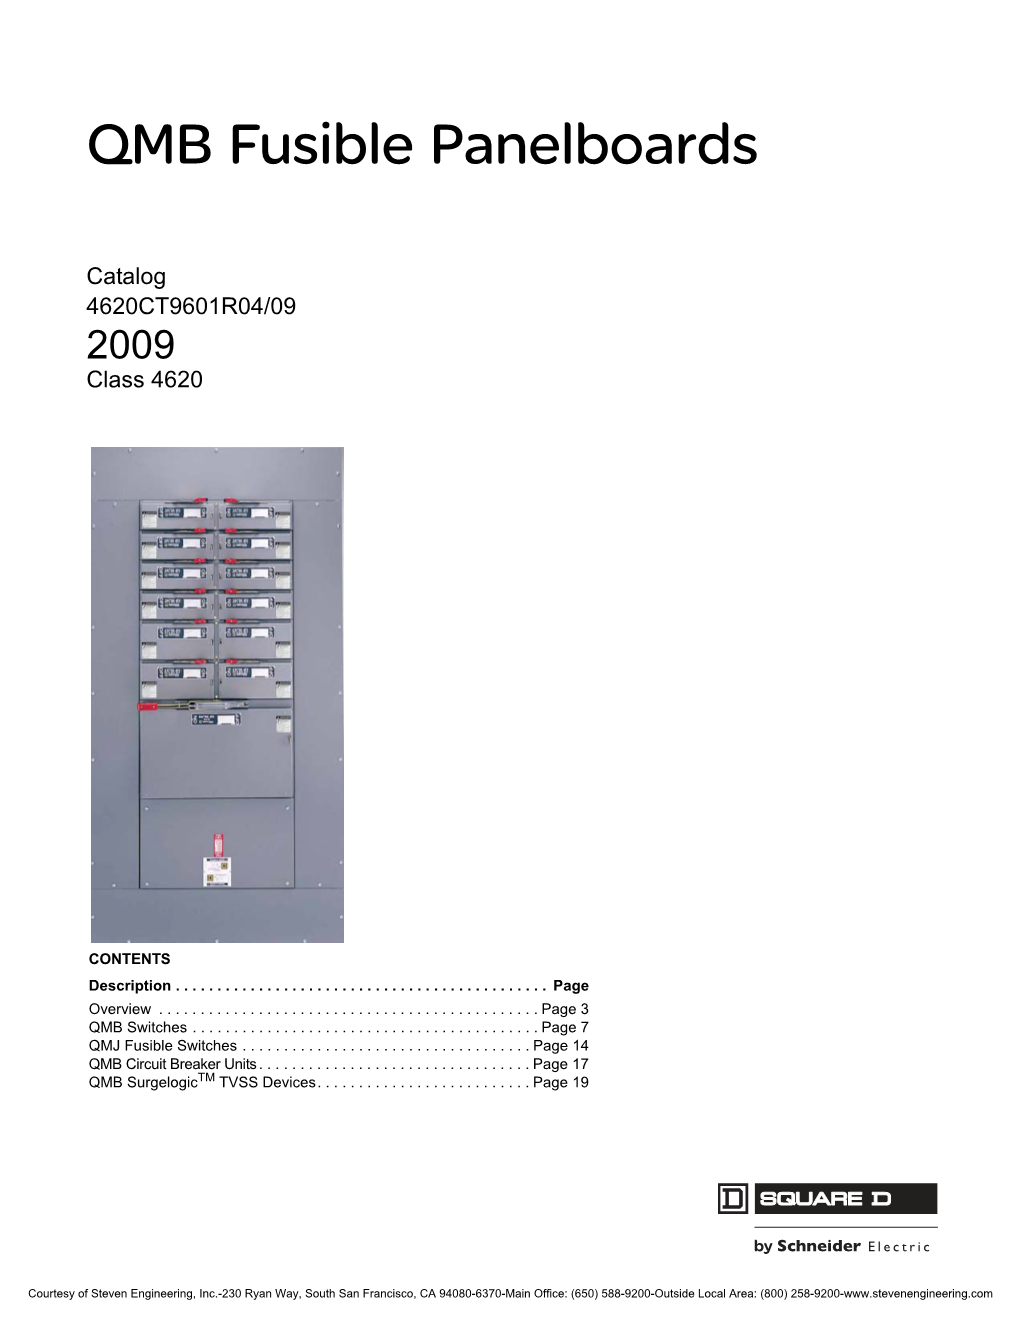 Schneider Electric QMB Fusible Panelboards